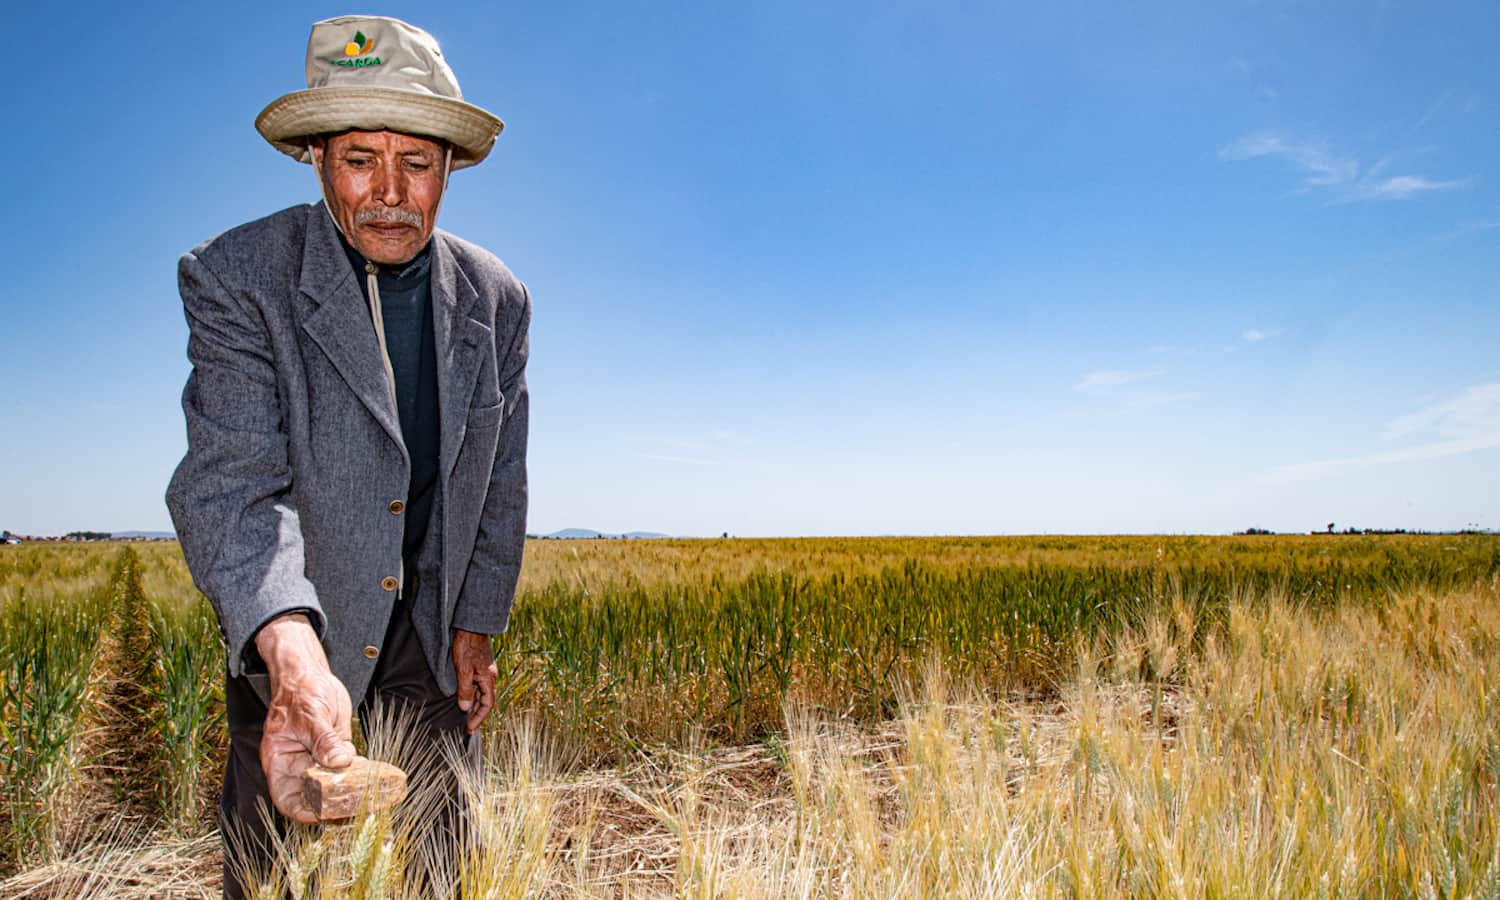 “We are working with more than 20 farmers around Morocco in a range of agro-ecological zones and will also expand some of our outputs to Senegal, Ethiopia, and Lebanon to achieve the best possible solutions for the barley, lentil, and durum wheat systems,” Filippo says.